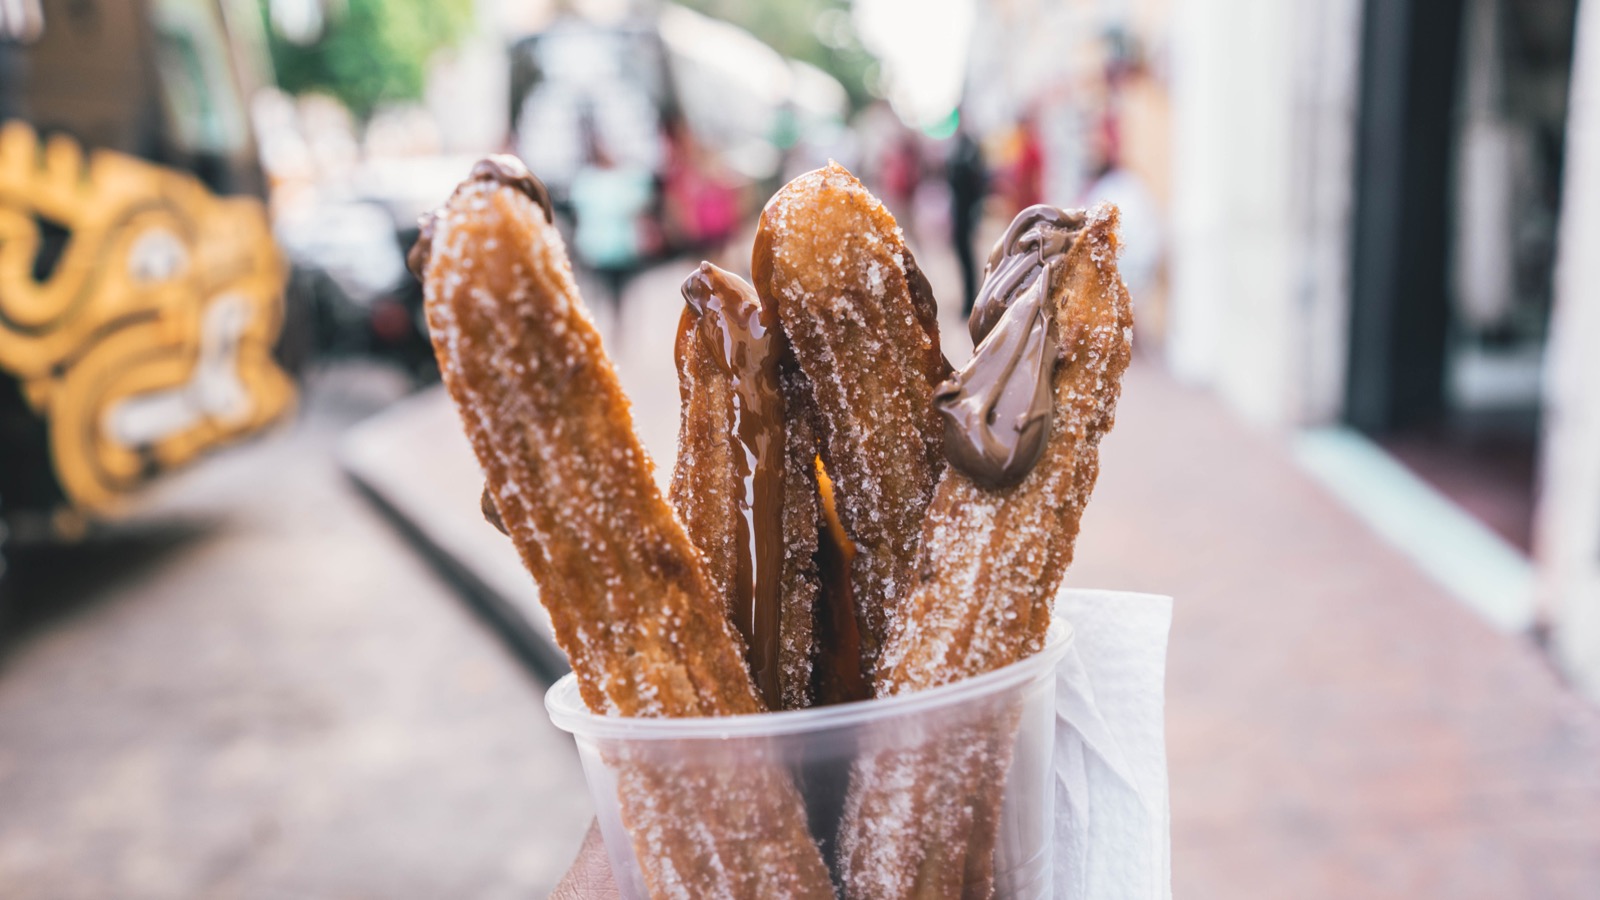 Did You Know I Can Tell How Adventurous You Are Purely by the Assorted International Foods You Choose? Churros